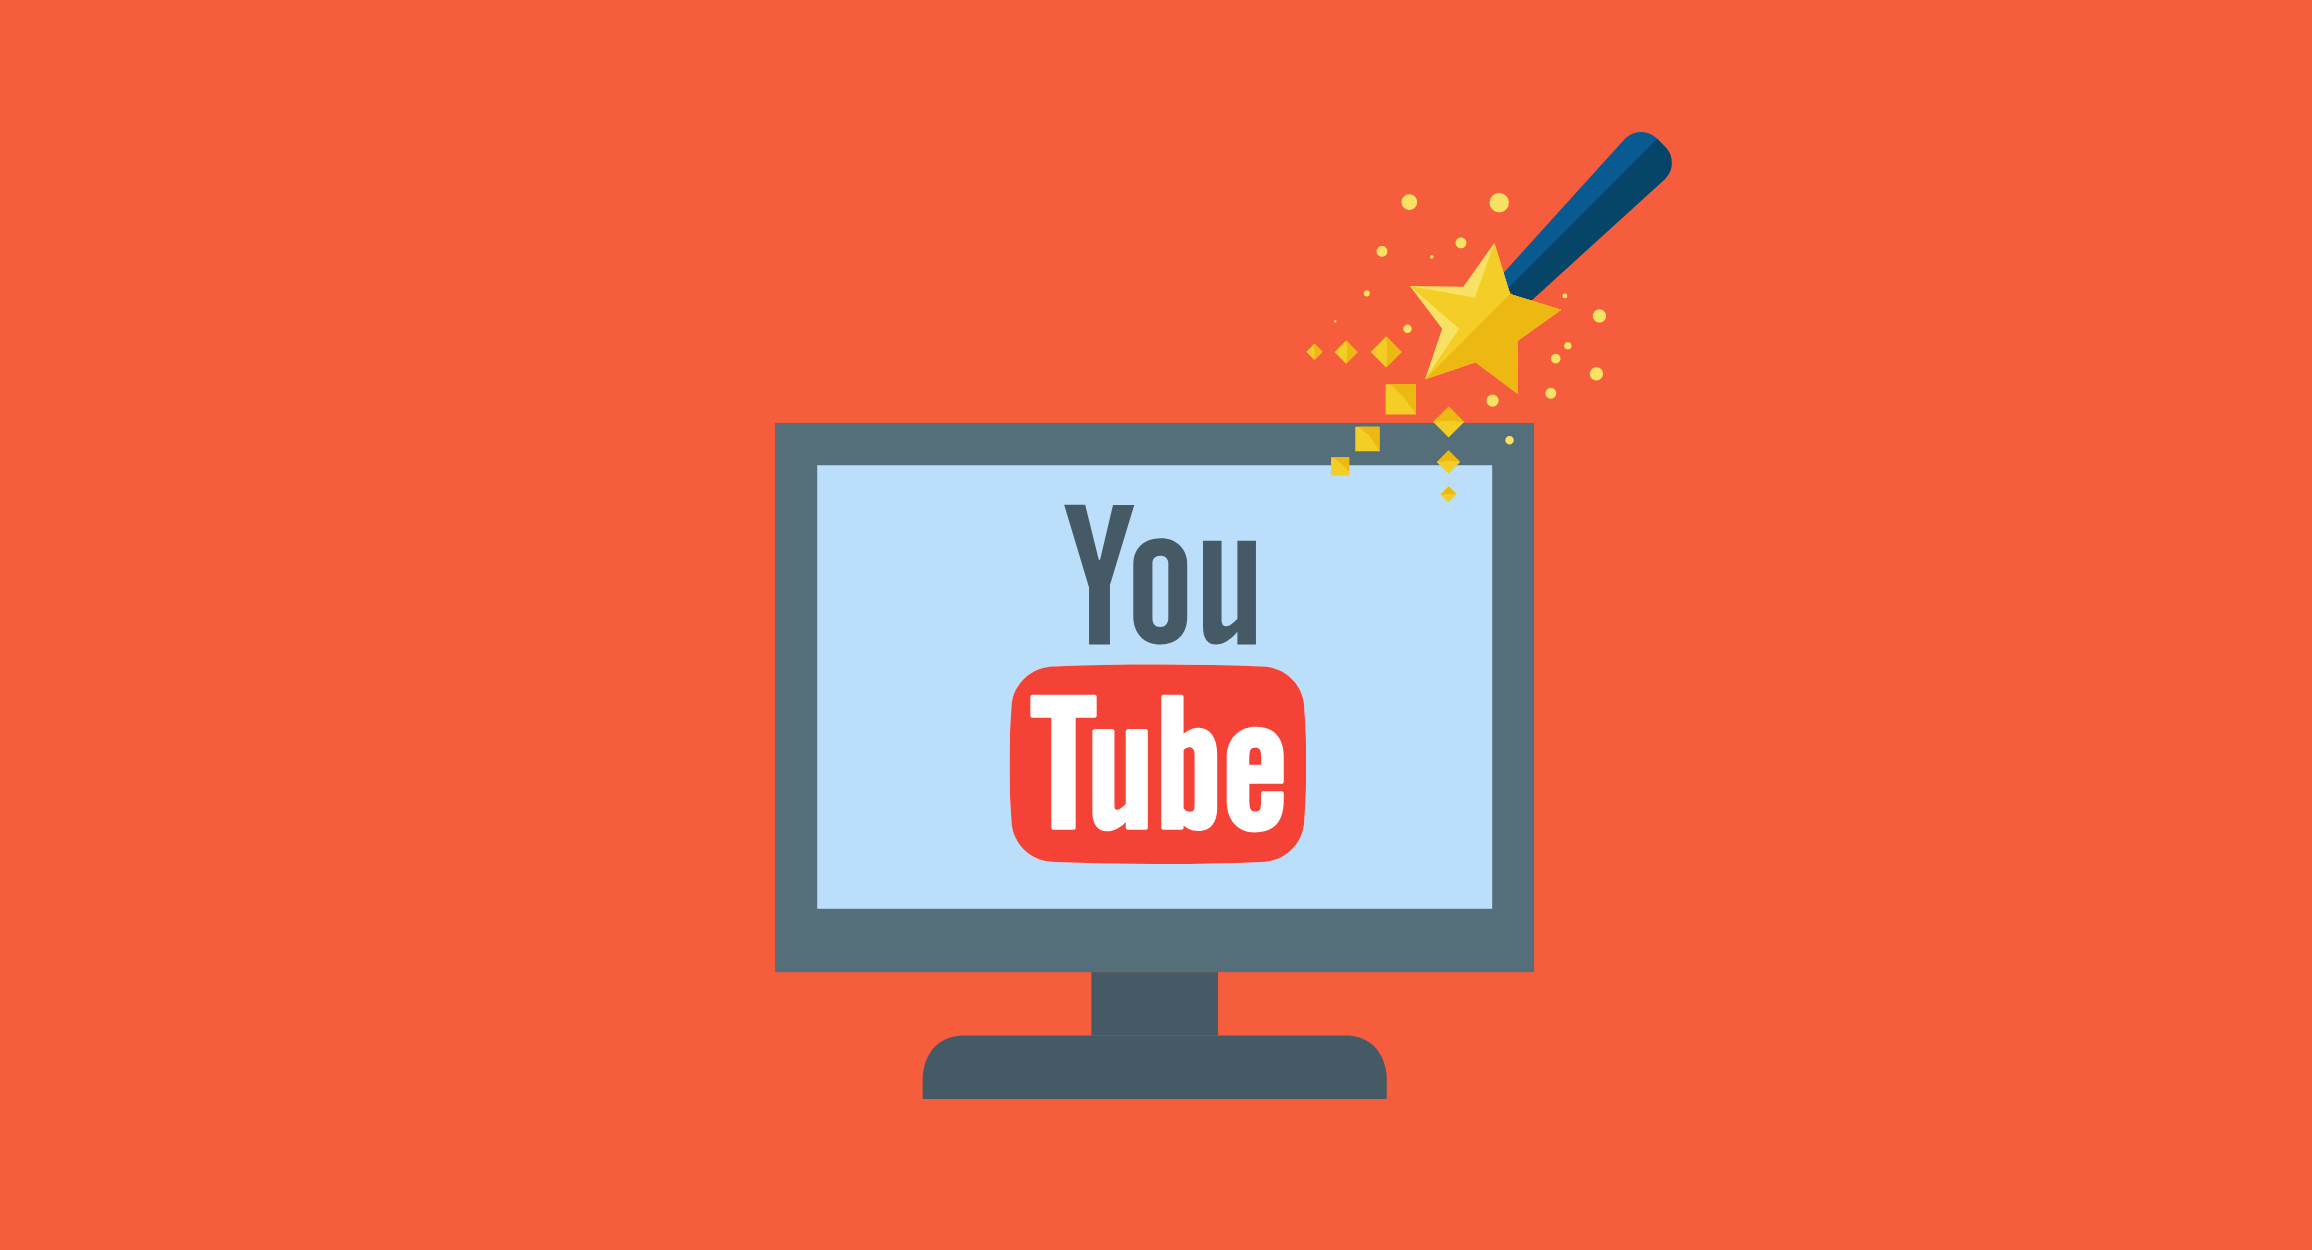 Tips to Grow Personal Brand on YouTube